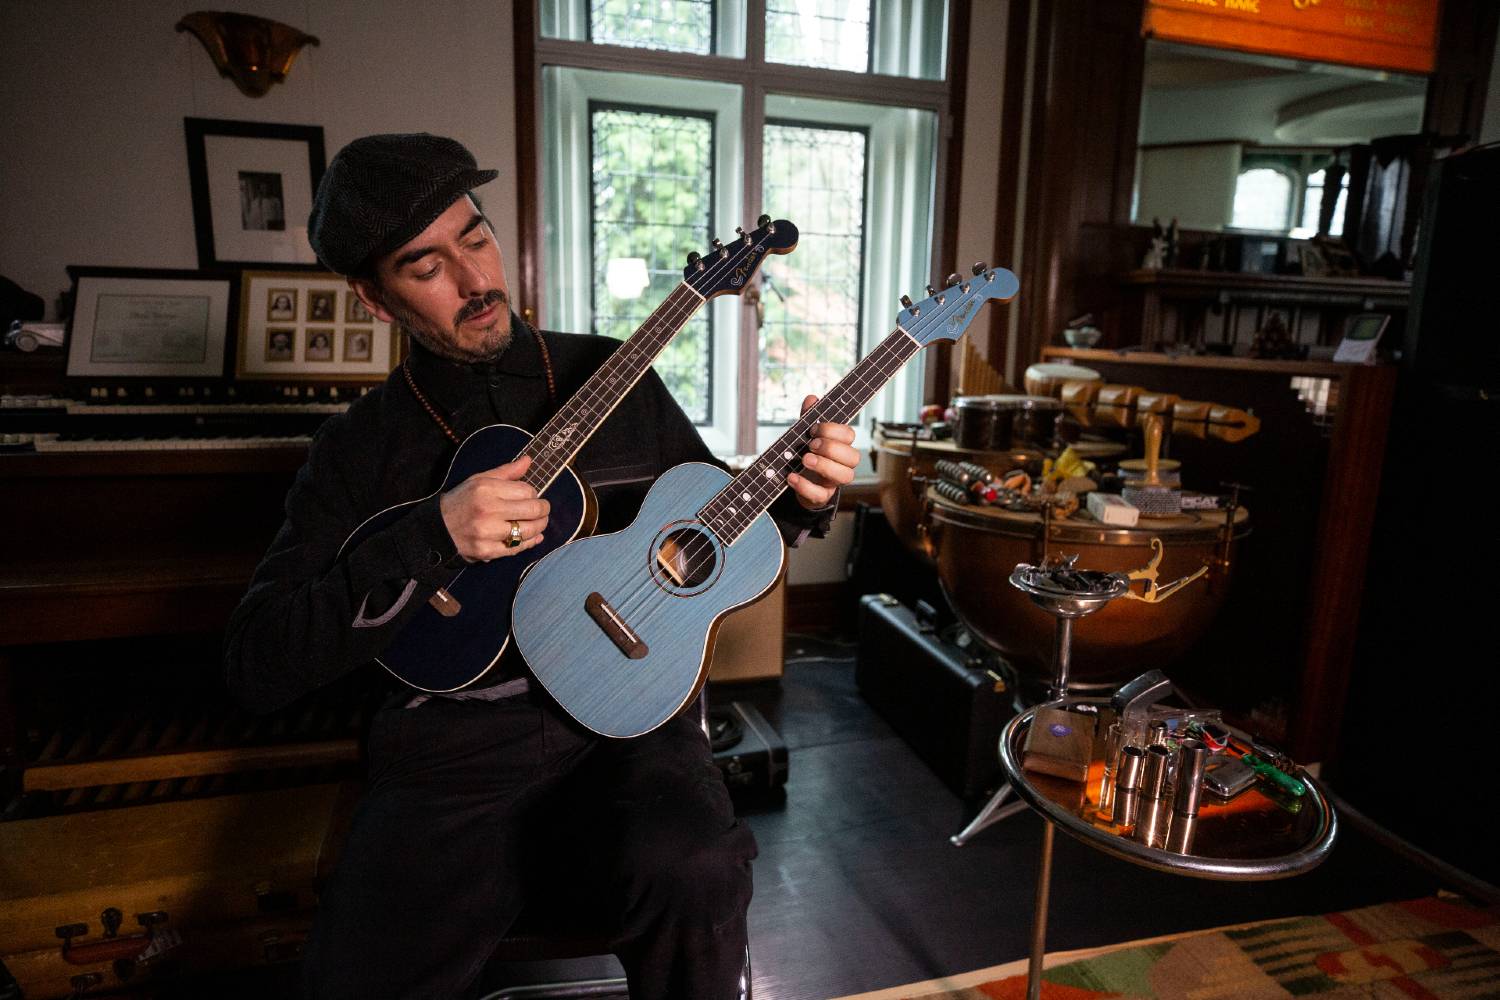 Dhani discusses new Signature Series Ukulele and design process